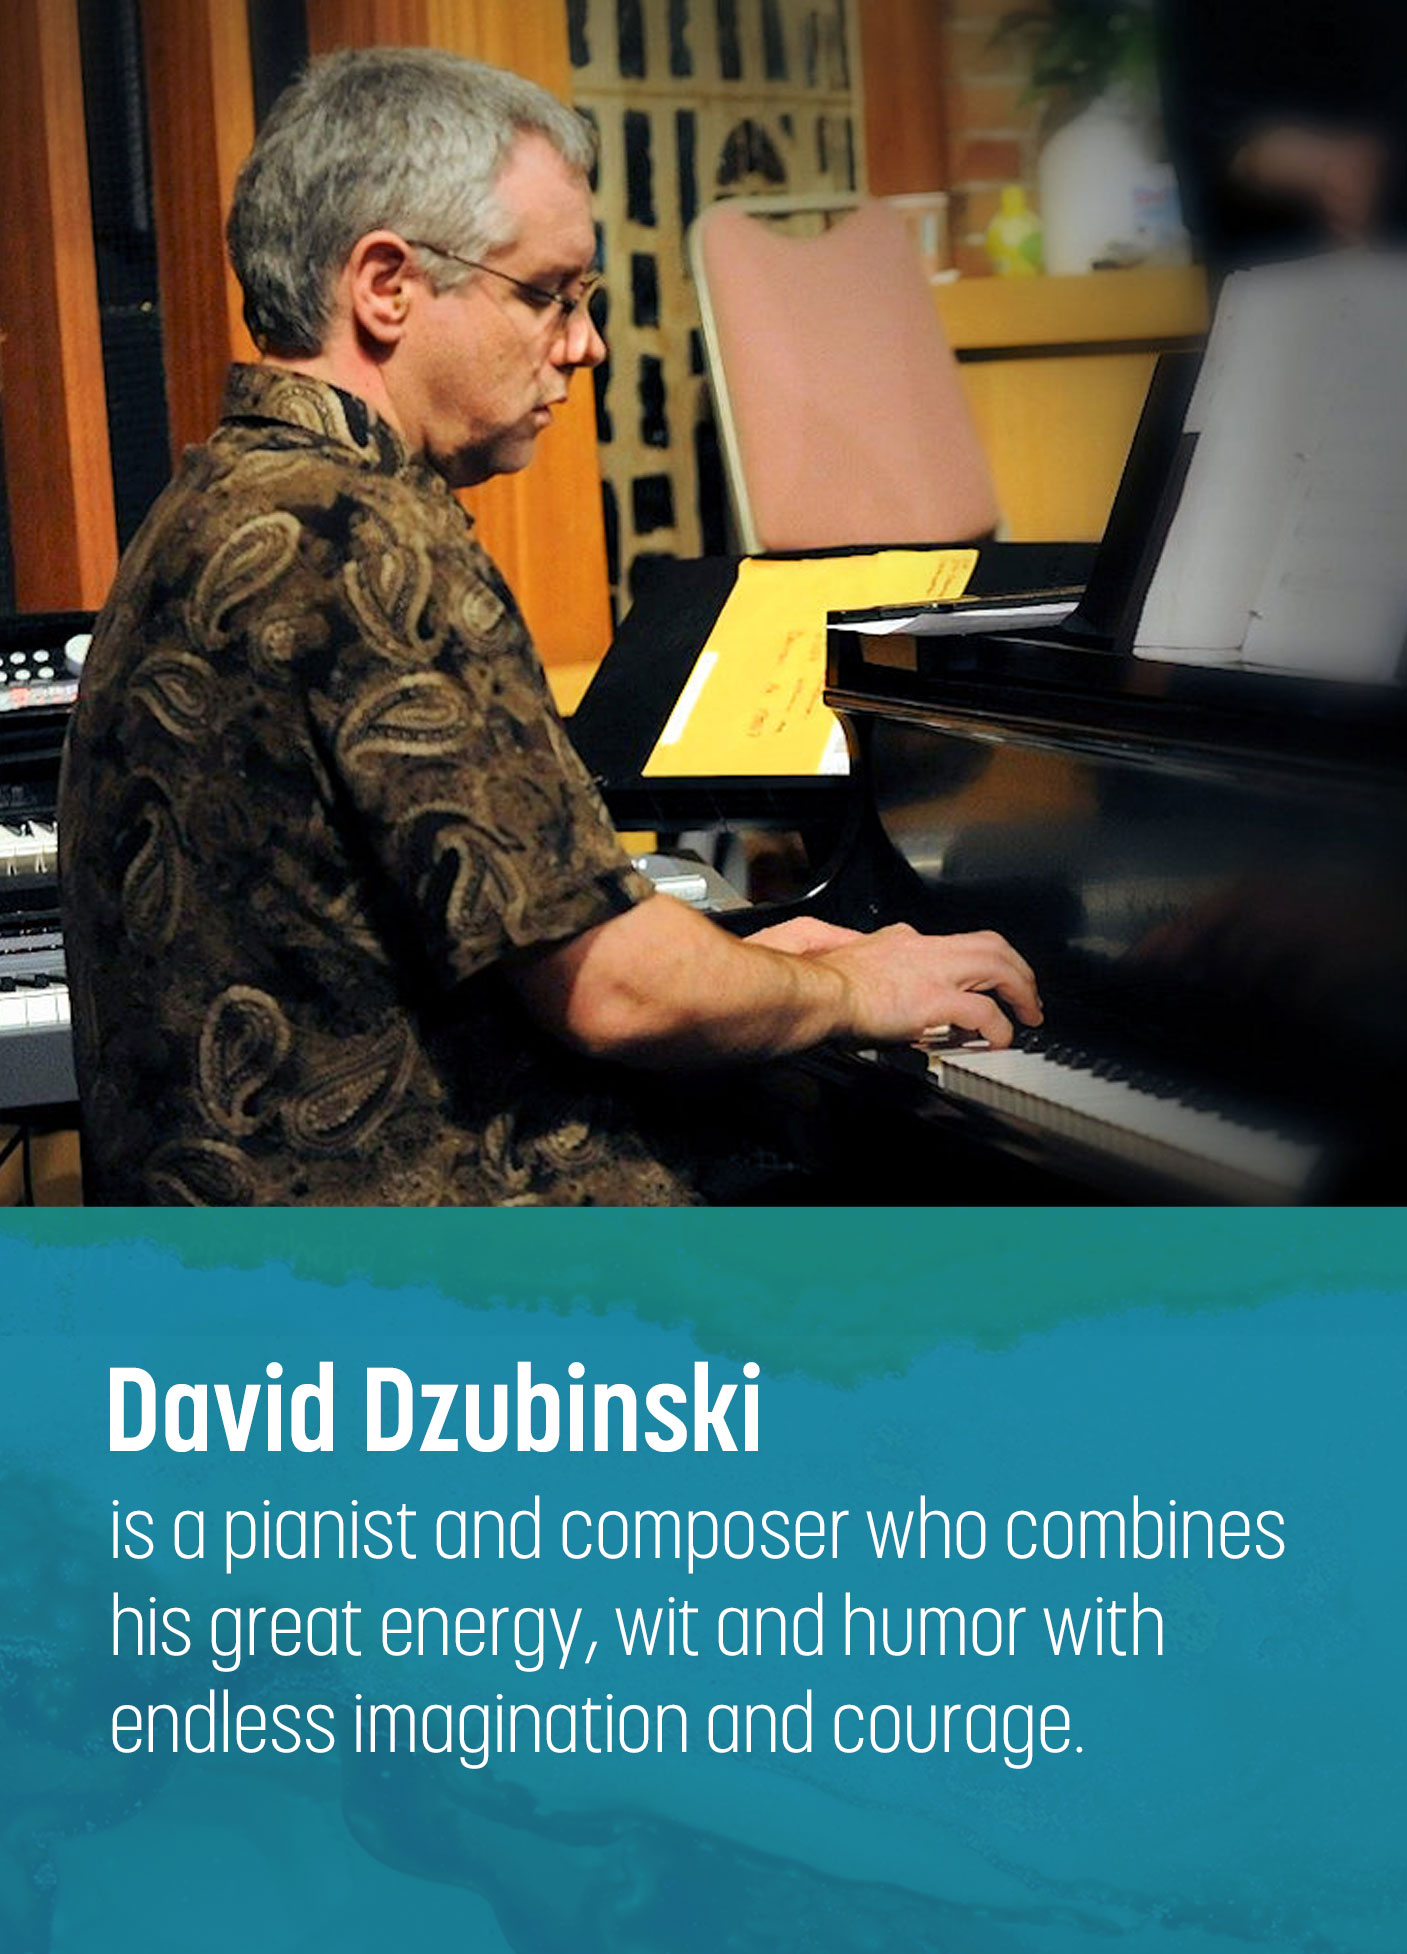 David Dzubinski is a pianist and composer who combines his great energy, wit and humor with endless imagination and courage.